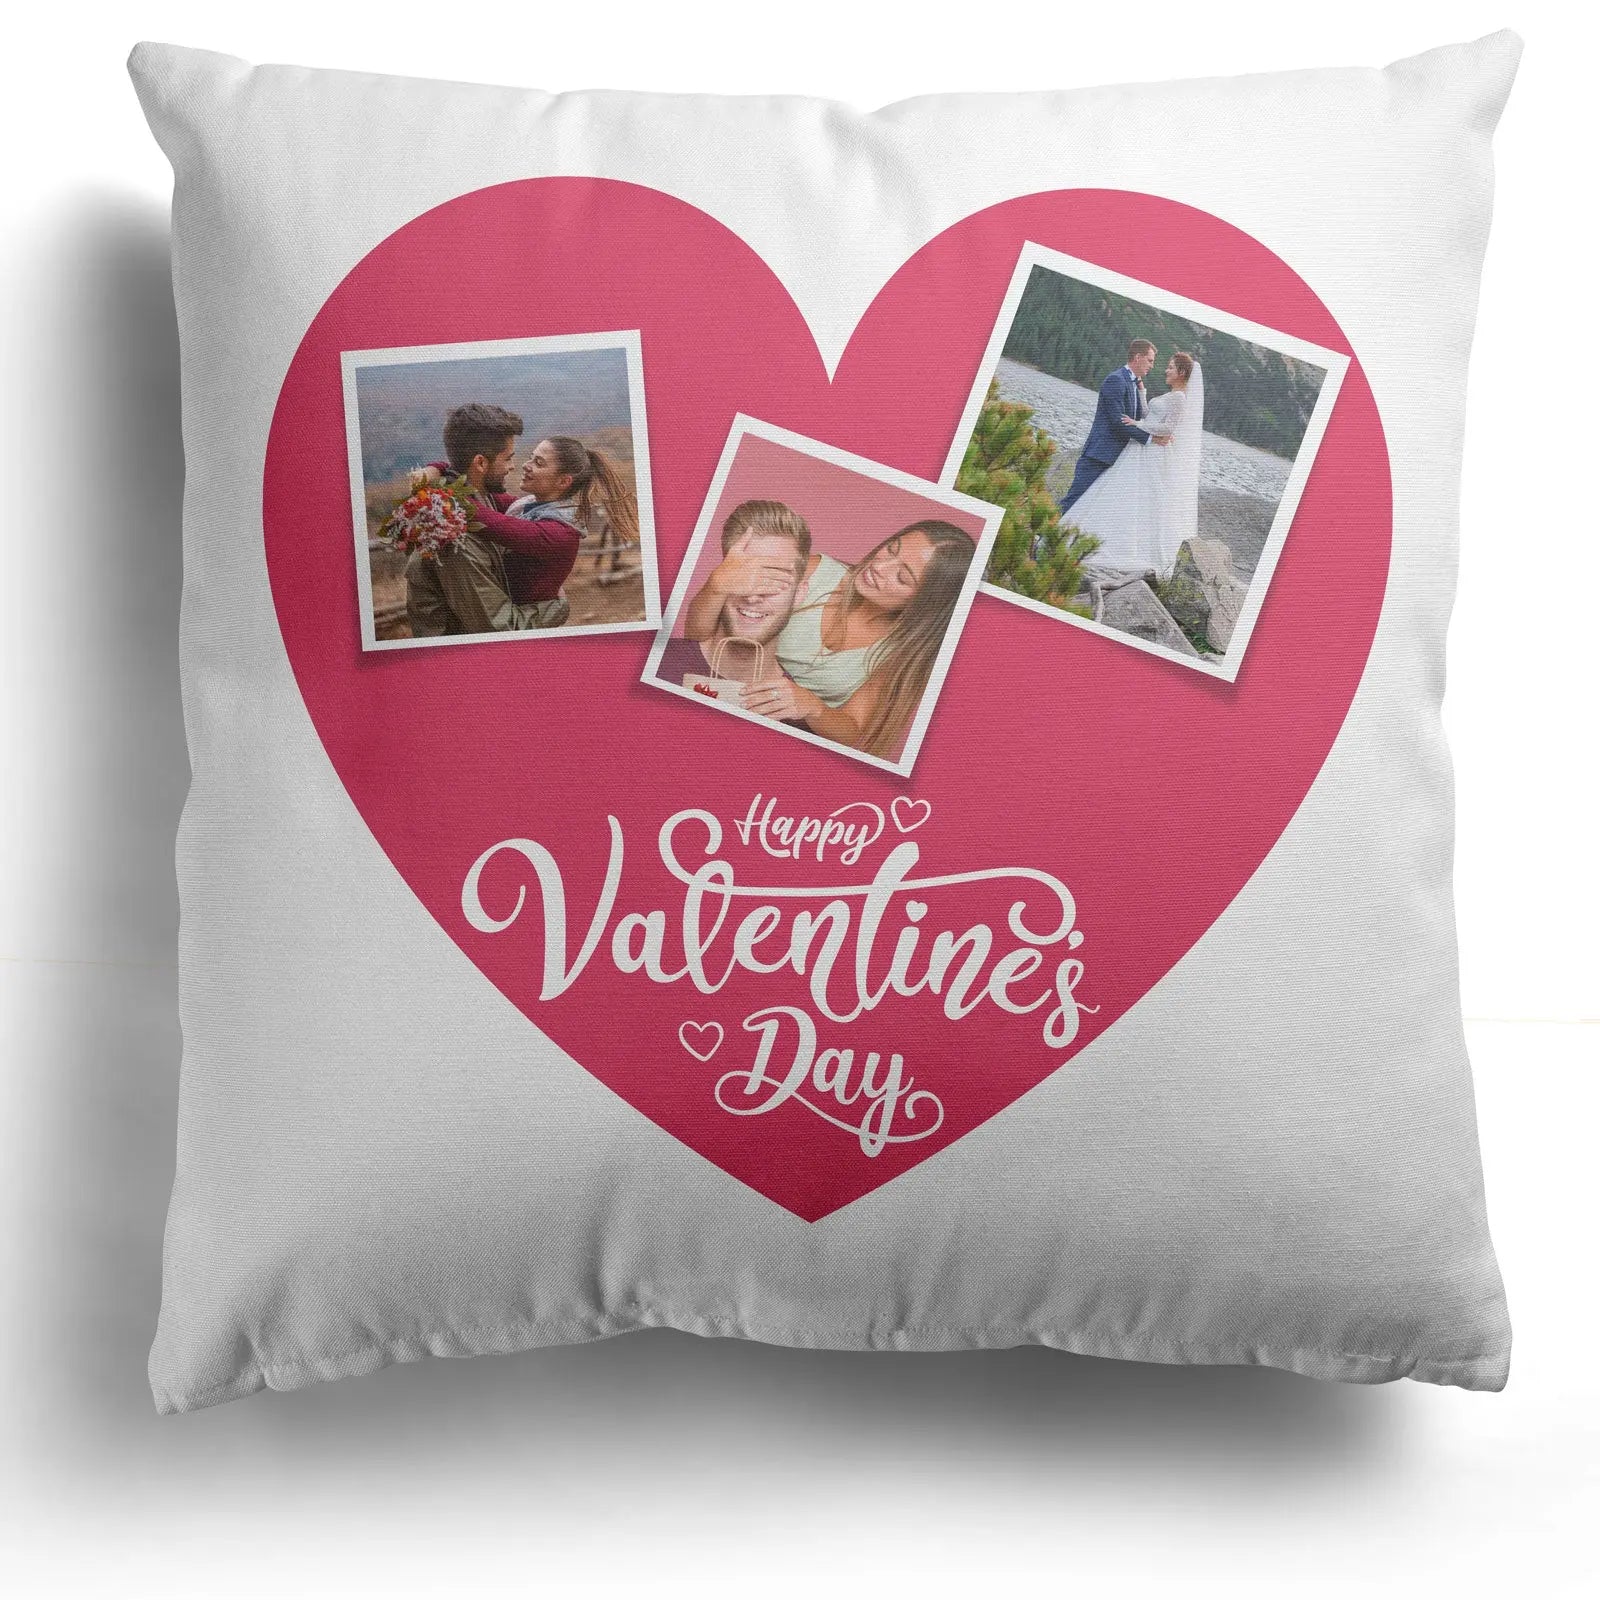 Personalised Cushion  Valentines Day  Couples & Romance  40x40cm 1 Image  Pink Heart - CushionPop